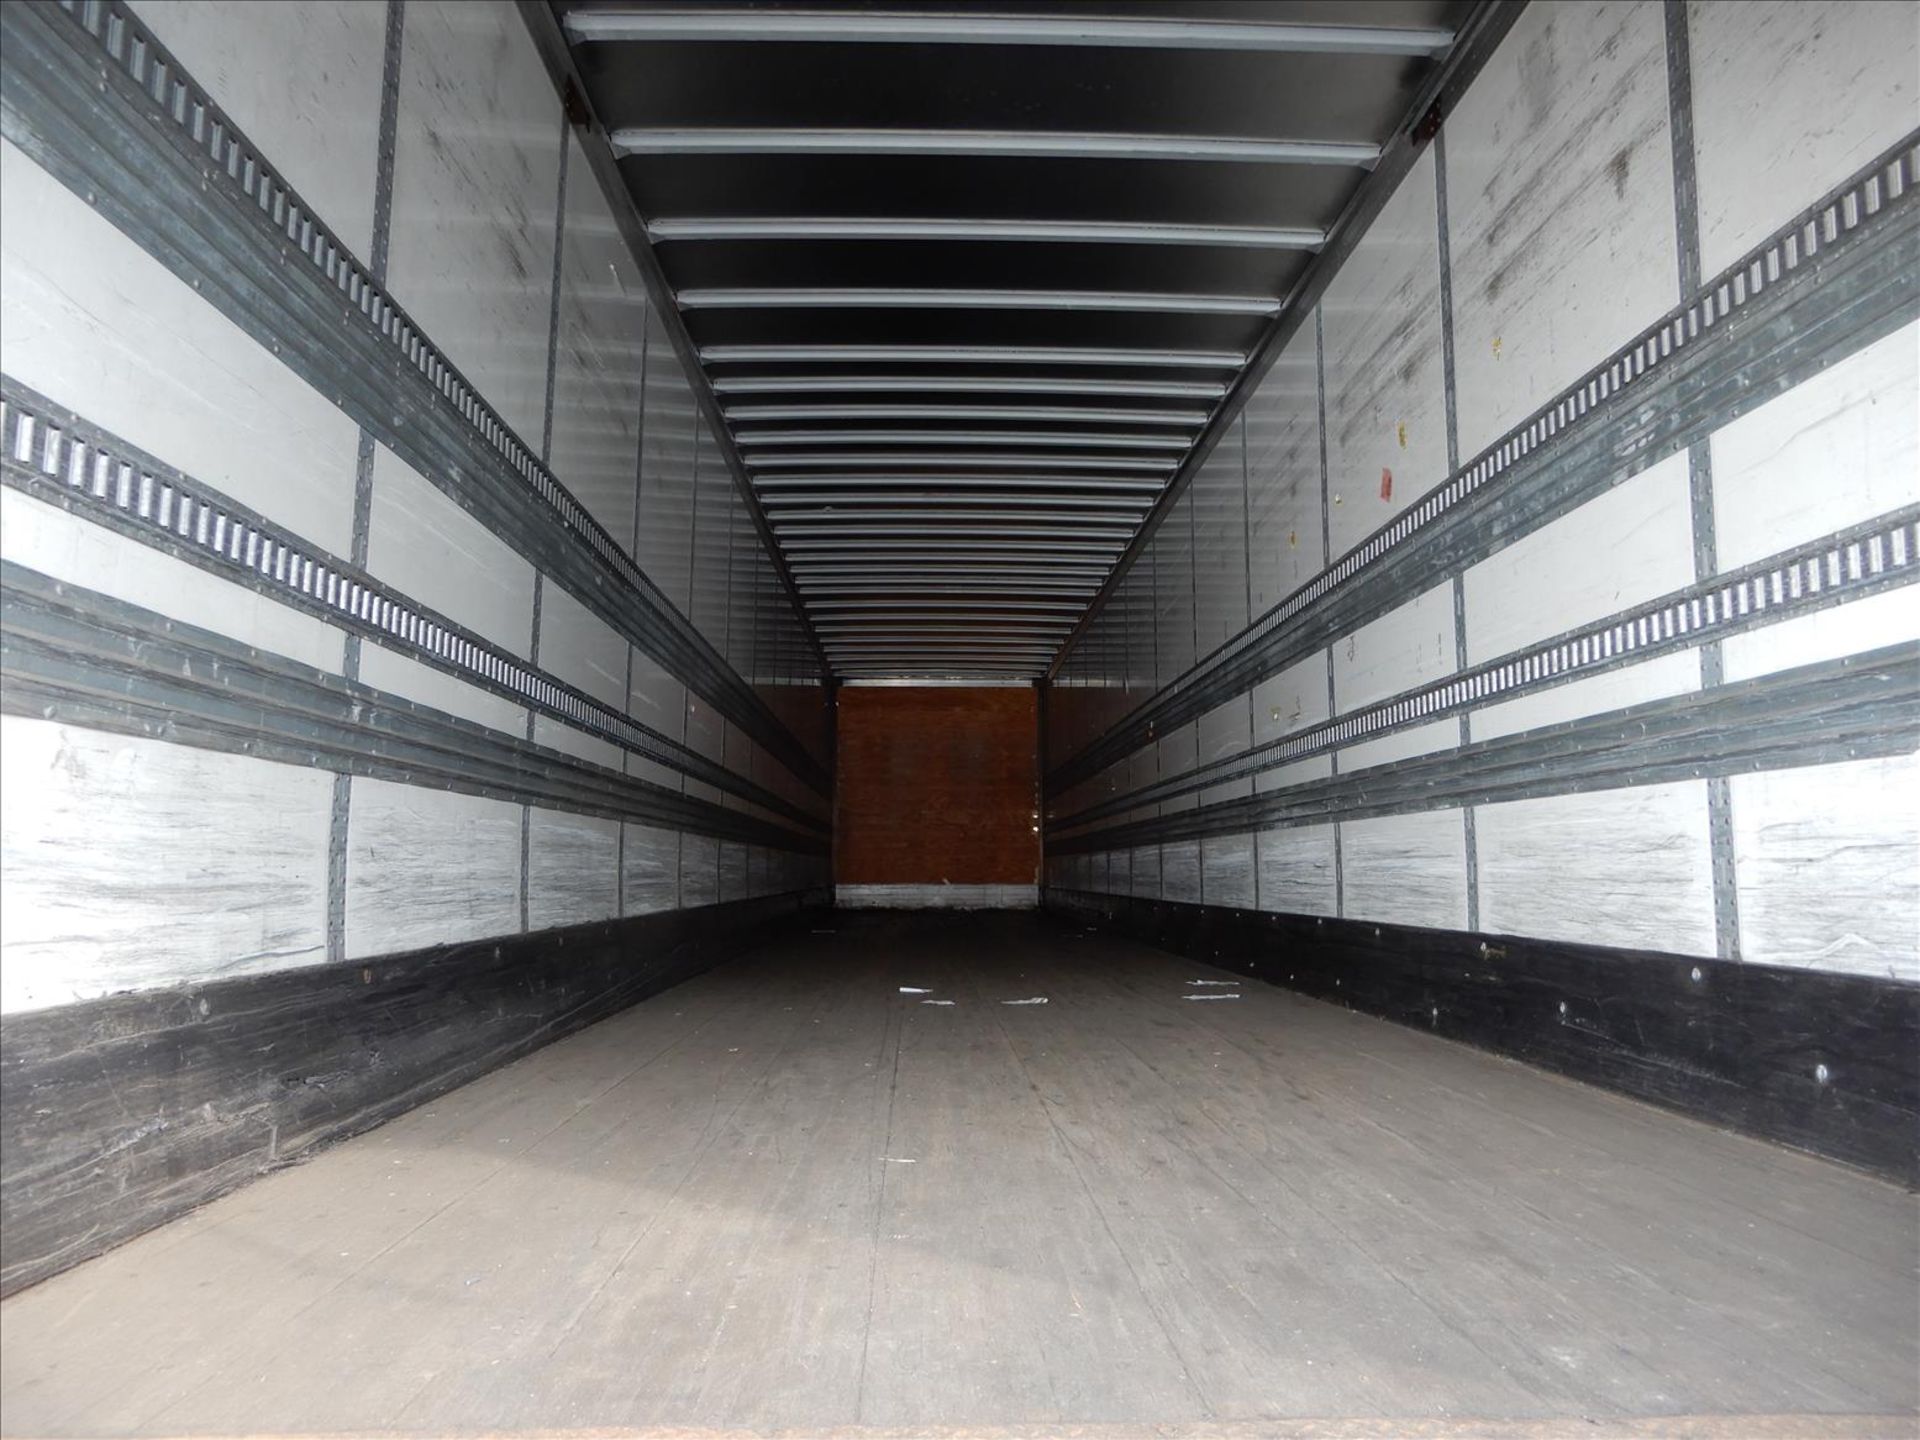 2012 Stoughton Trailer - Located in Indianapolis, IN - Image 11 of 25